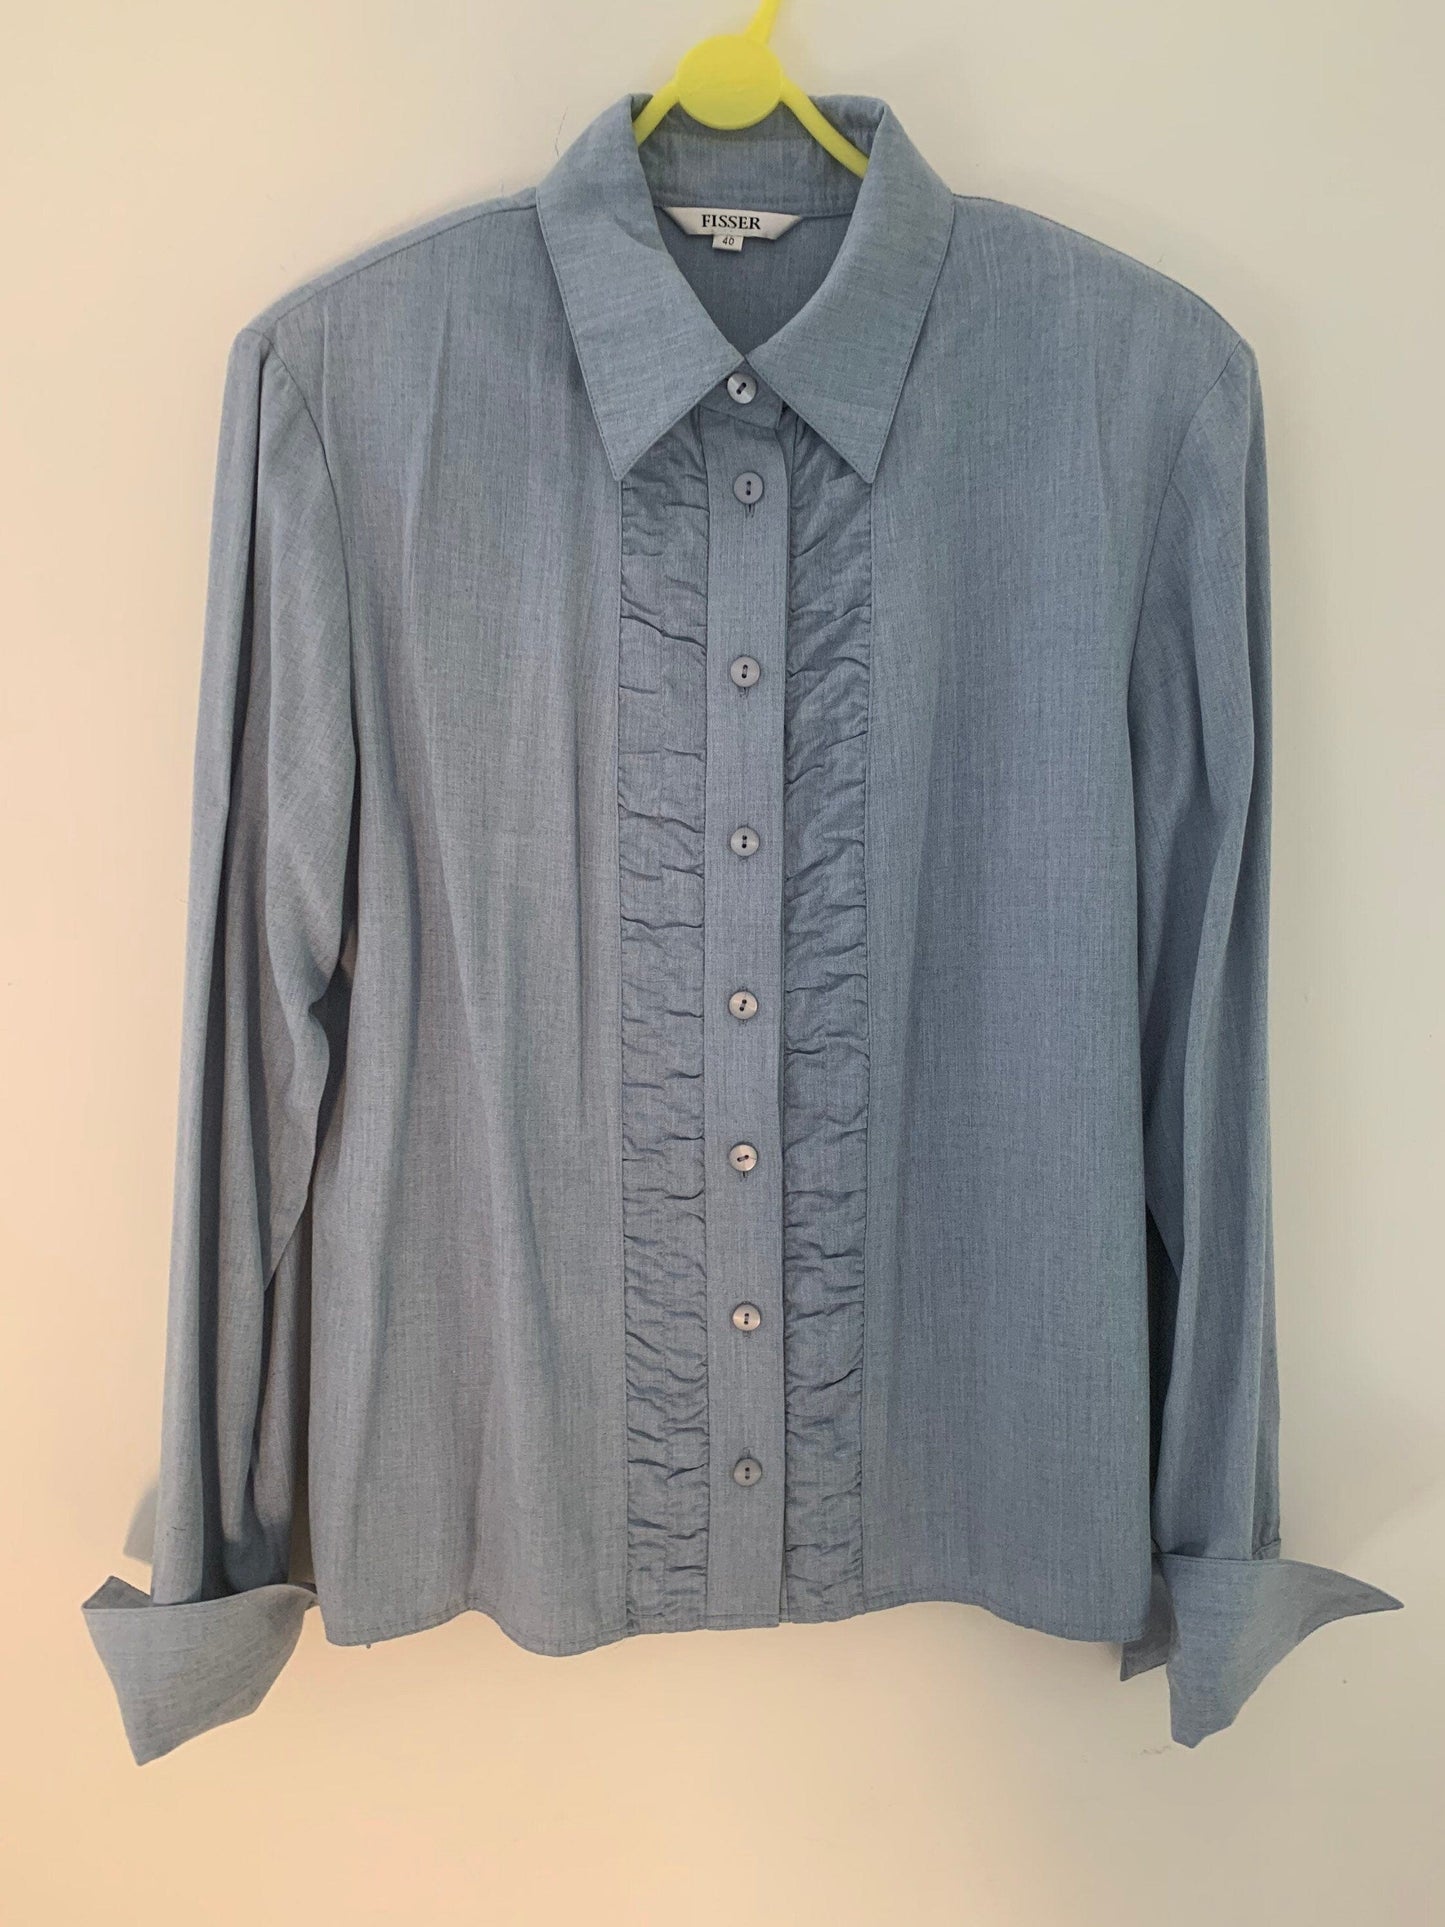 Blue Vintage Frilly Blouse Button Through Boxy long Sleeves - Size 14 - Double Cuff